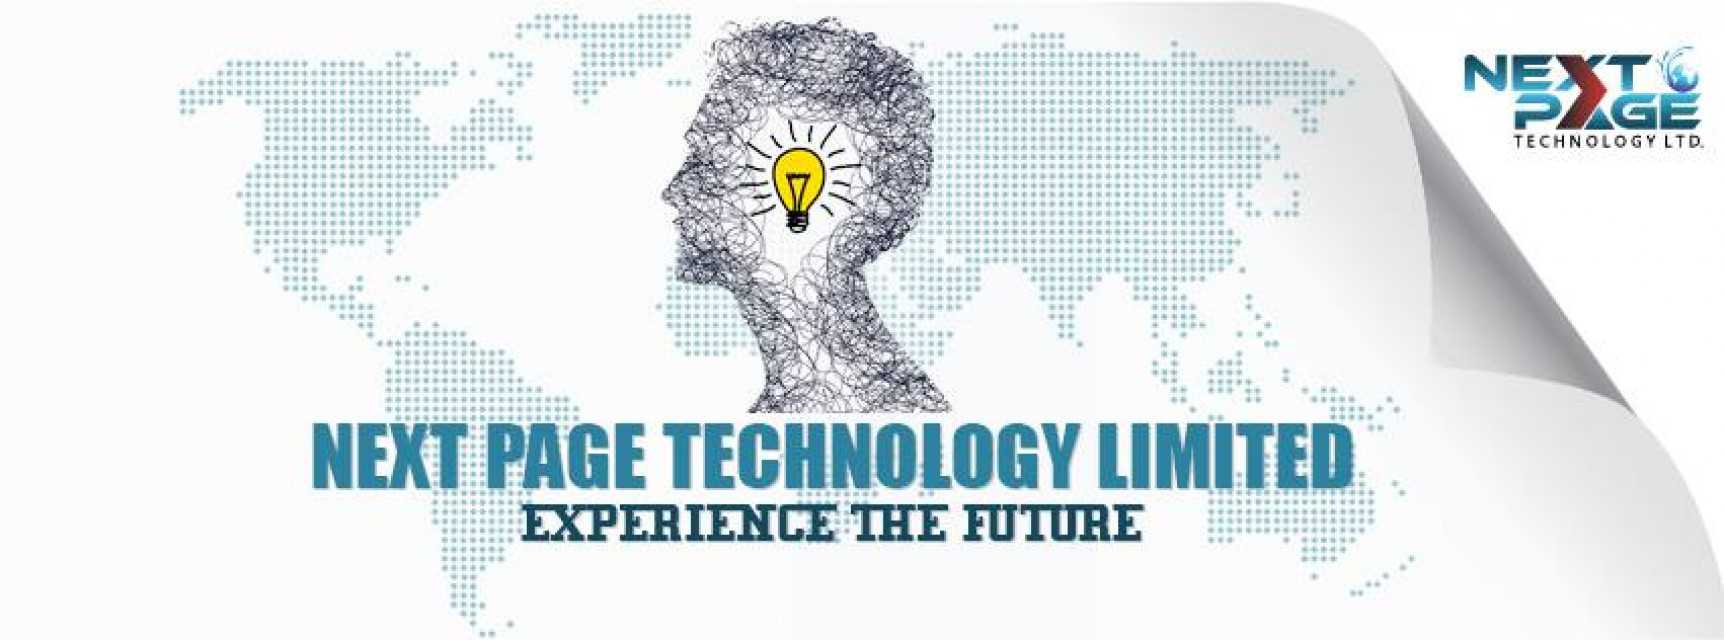 Next Page Technology Limited